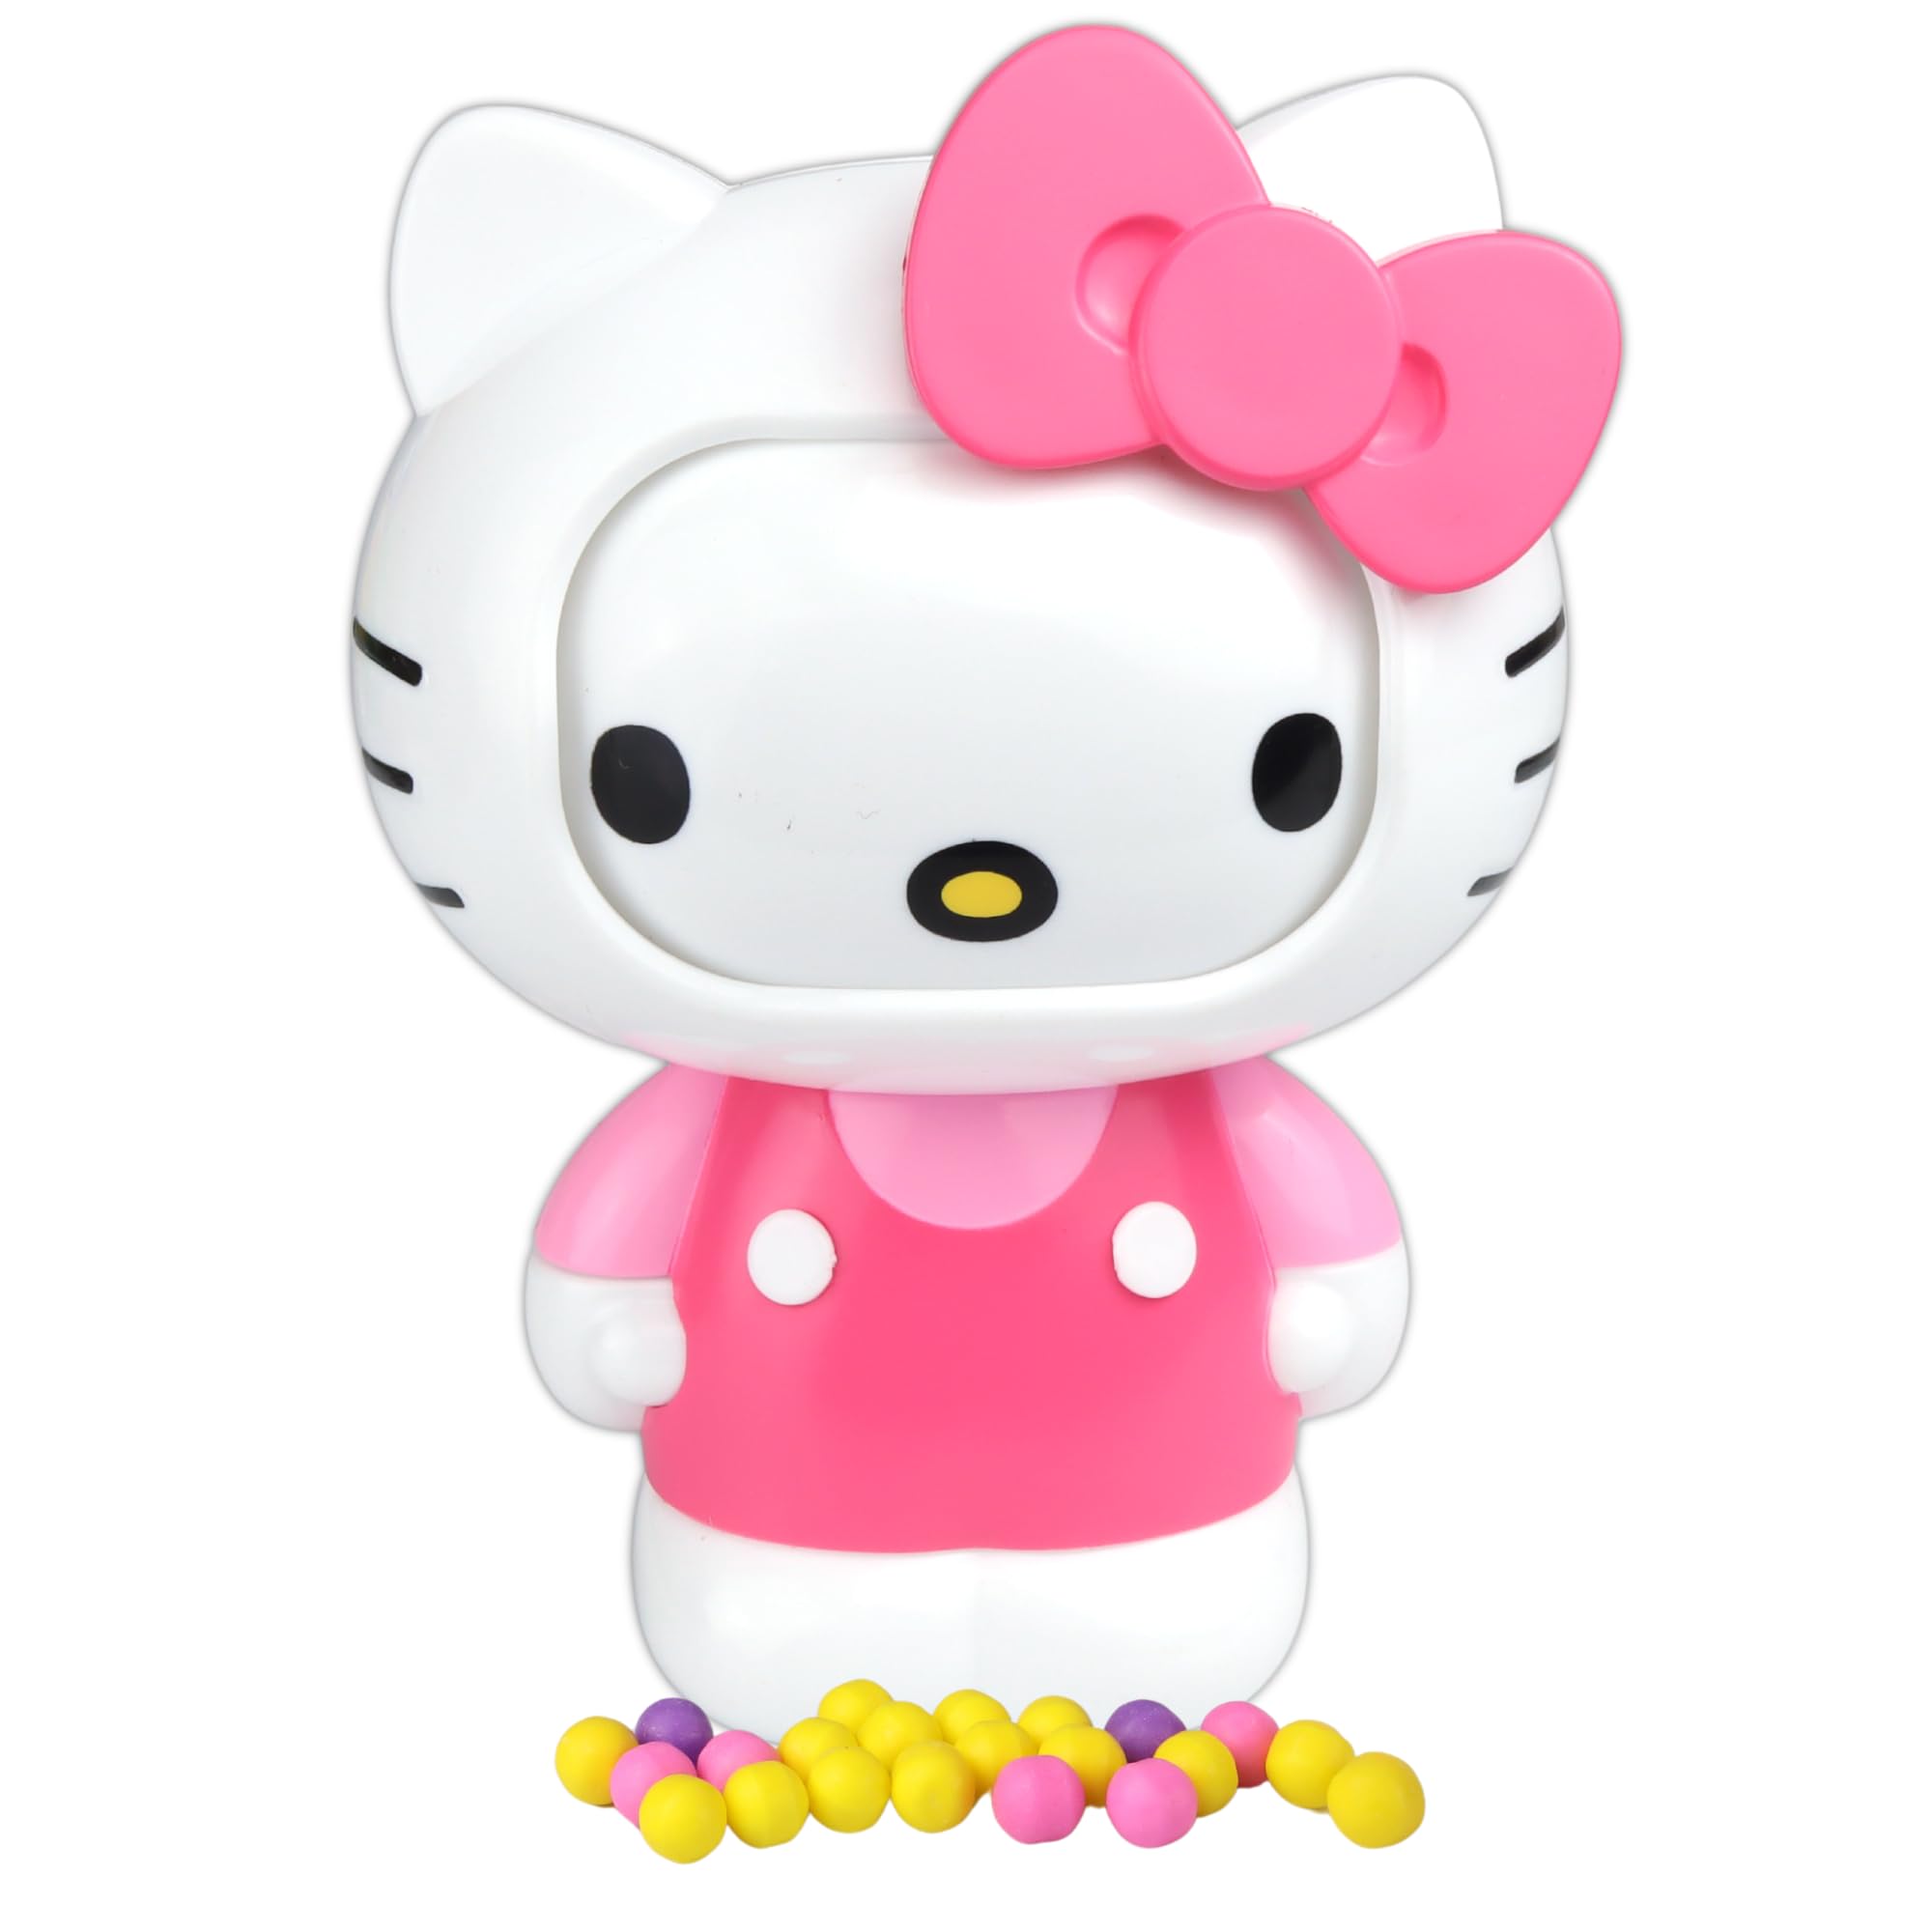 Hello Kitty - 4 Changing Faces - Dispenser